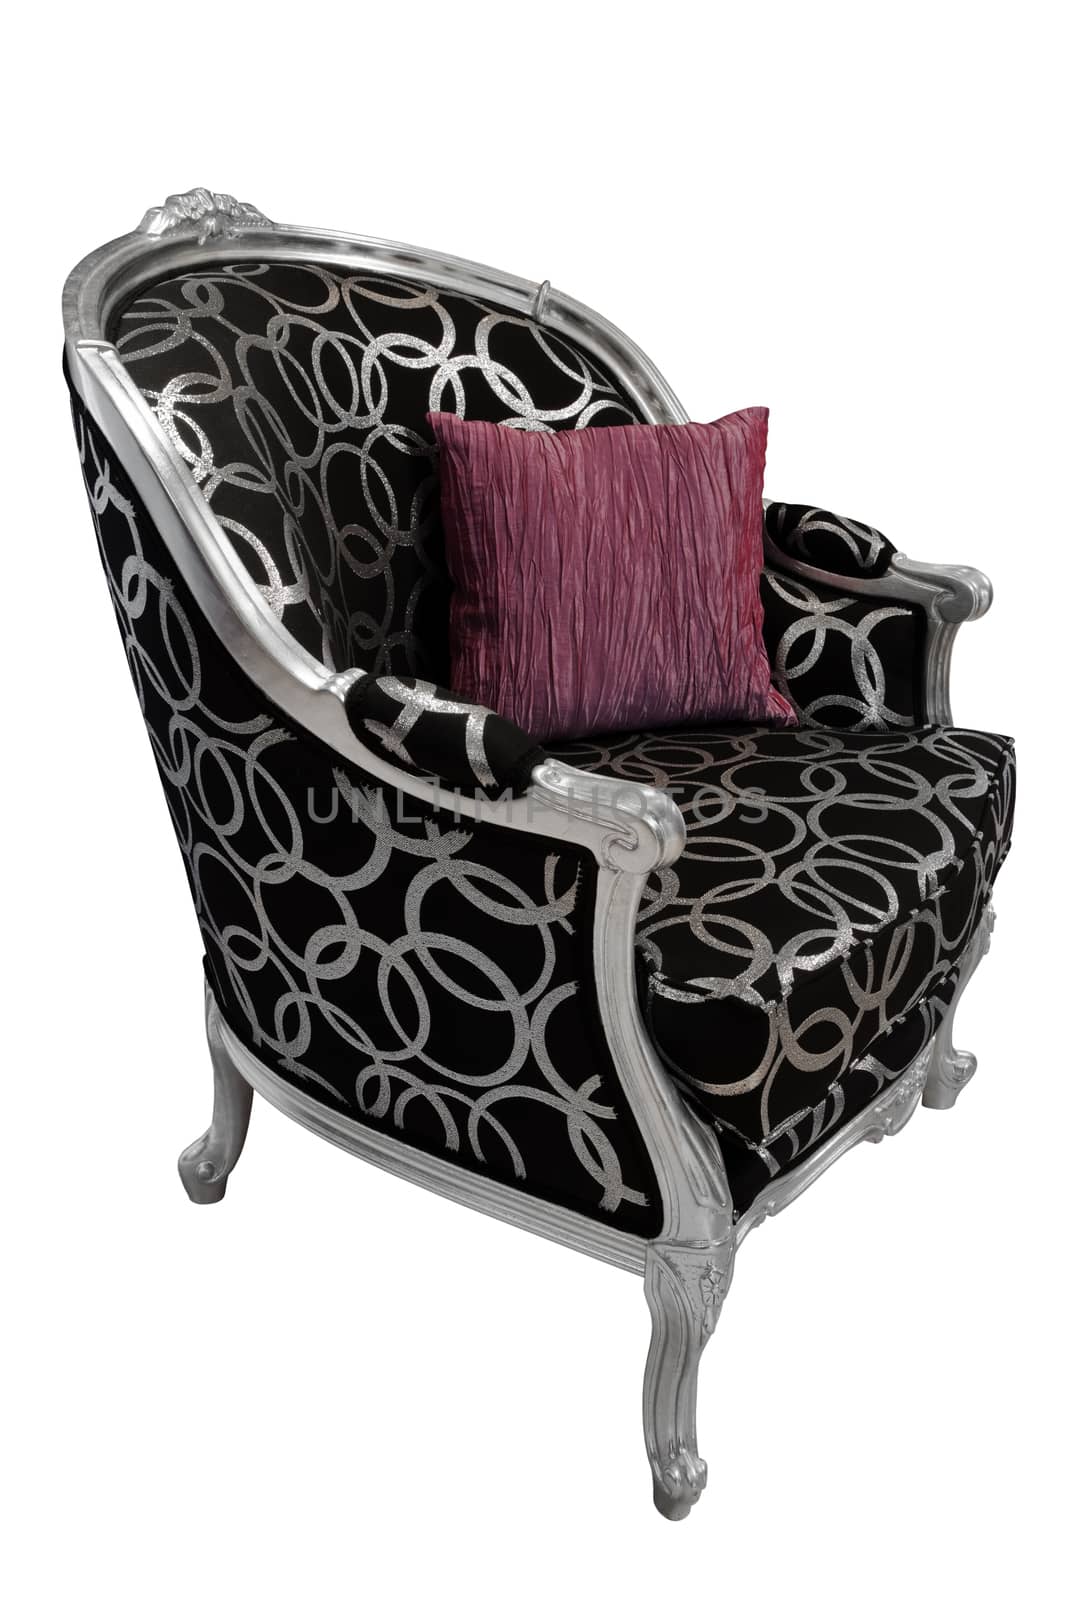 fashionable armchair by terex